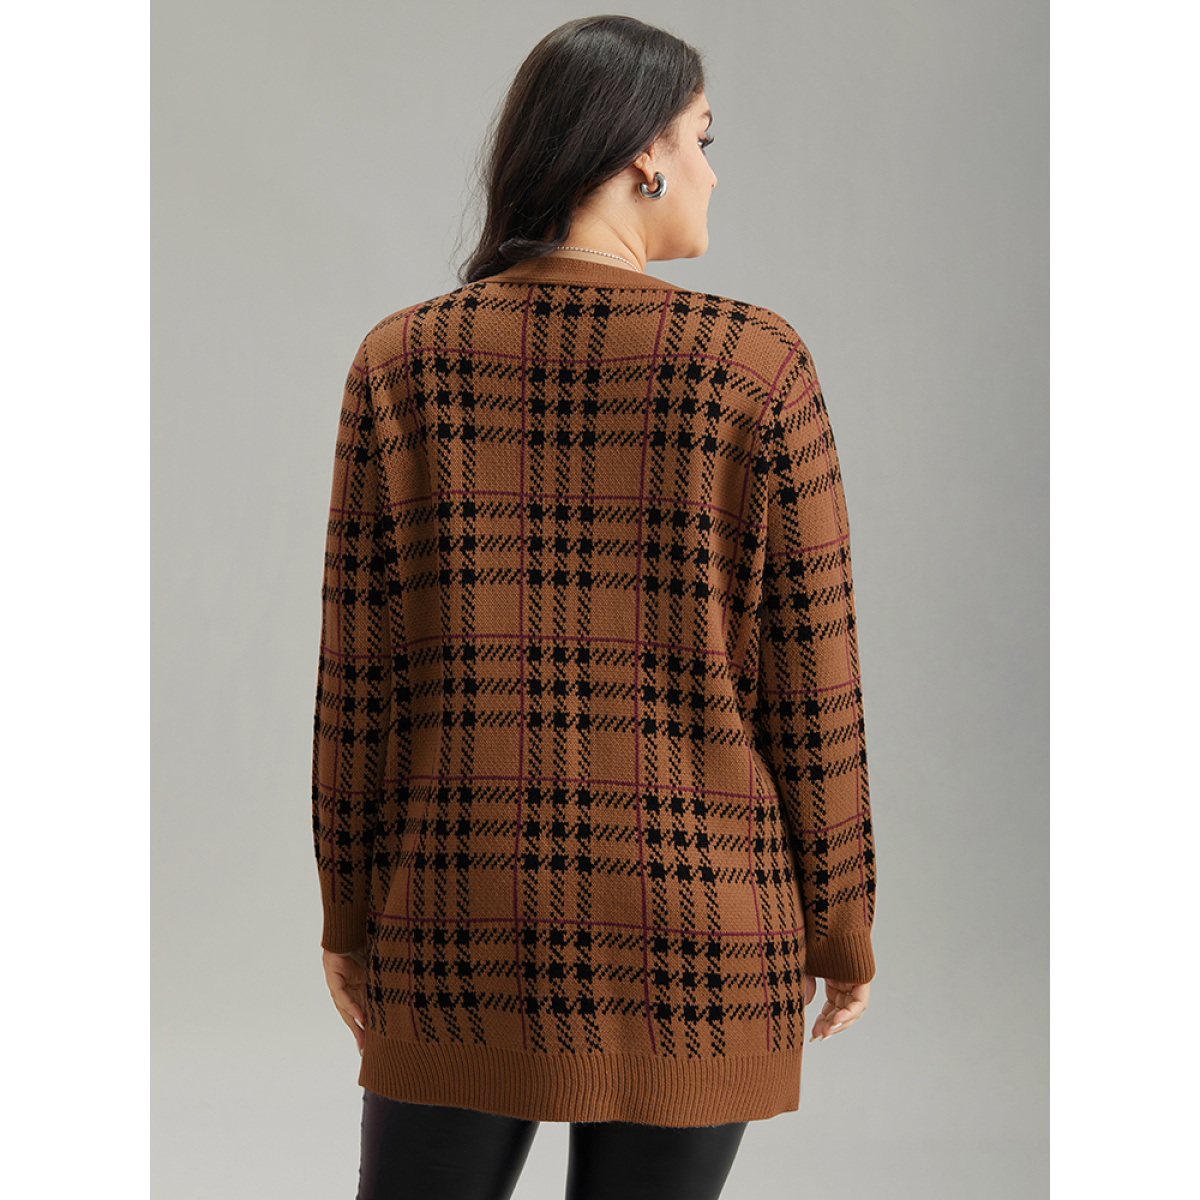 

Plus Size Plaid & Houndstooth Print Patched Pocket Cardigan DarkBrown Women Casual Loose Long Sleeve Dailywear Cardigans BloomChic